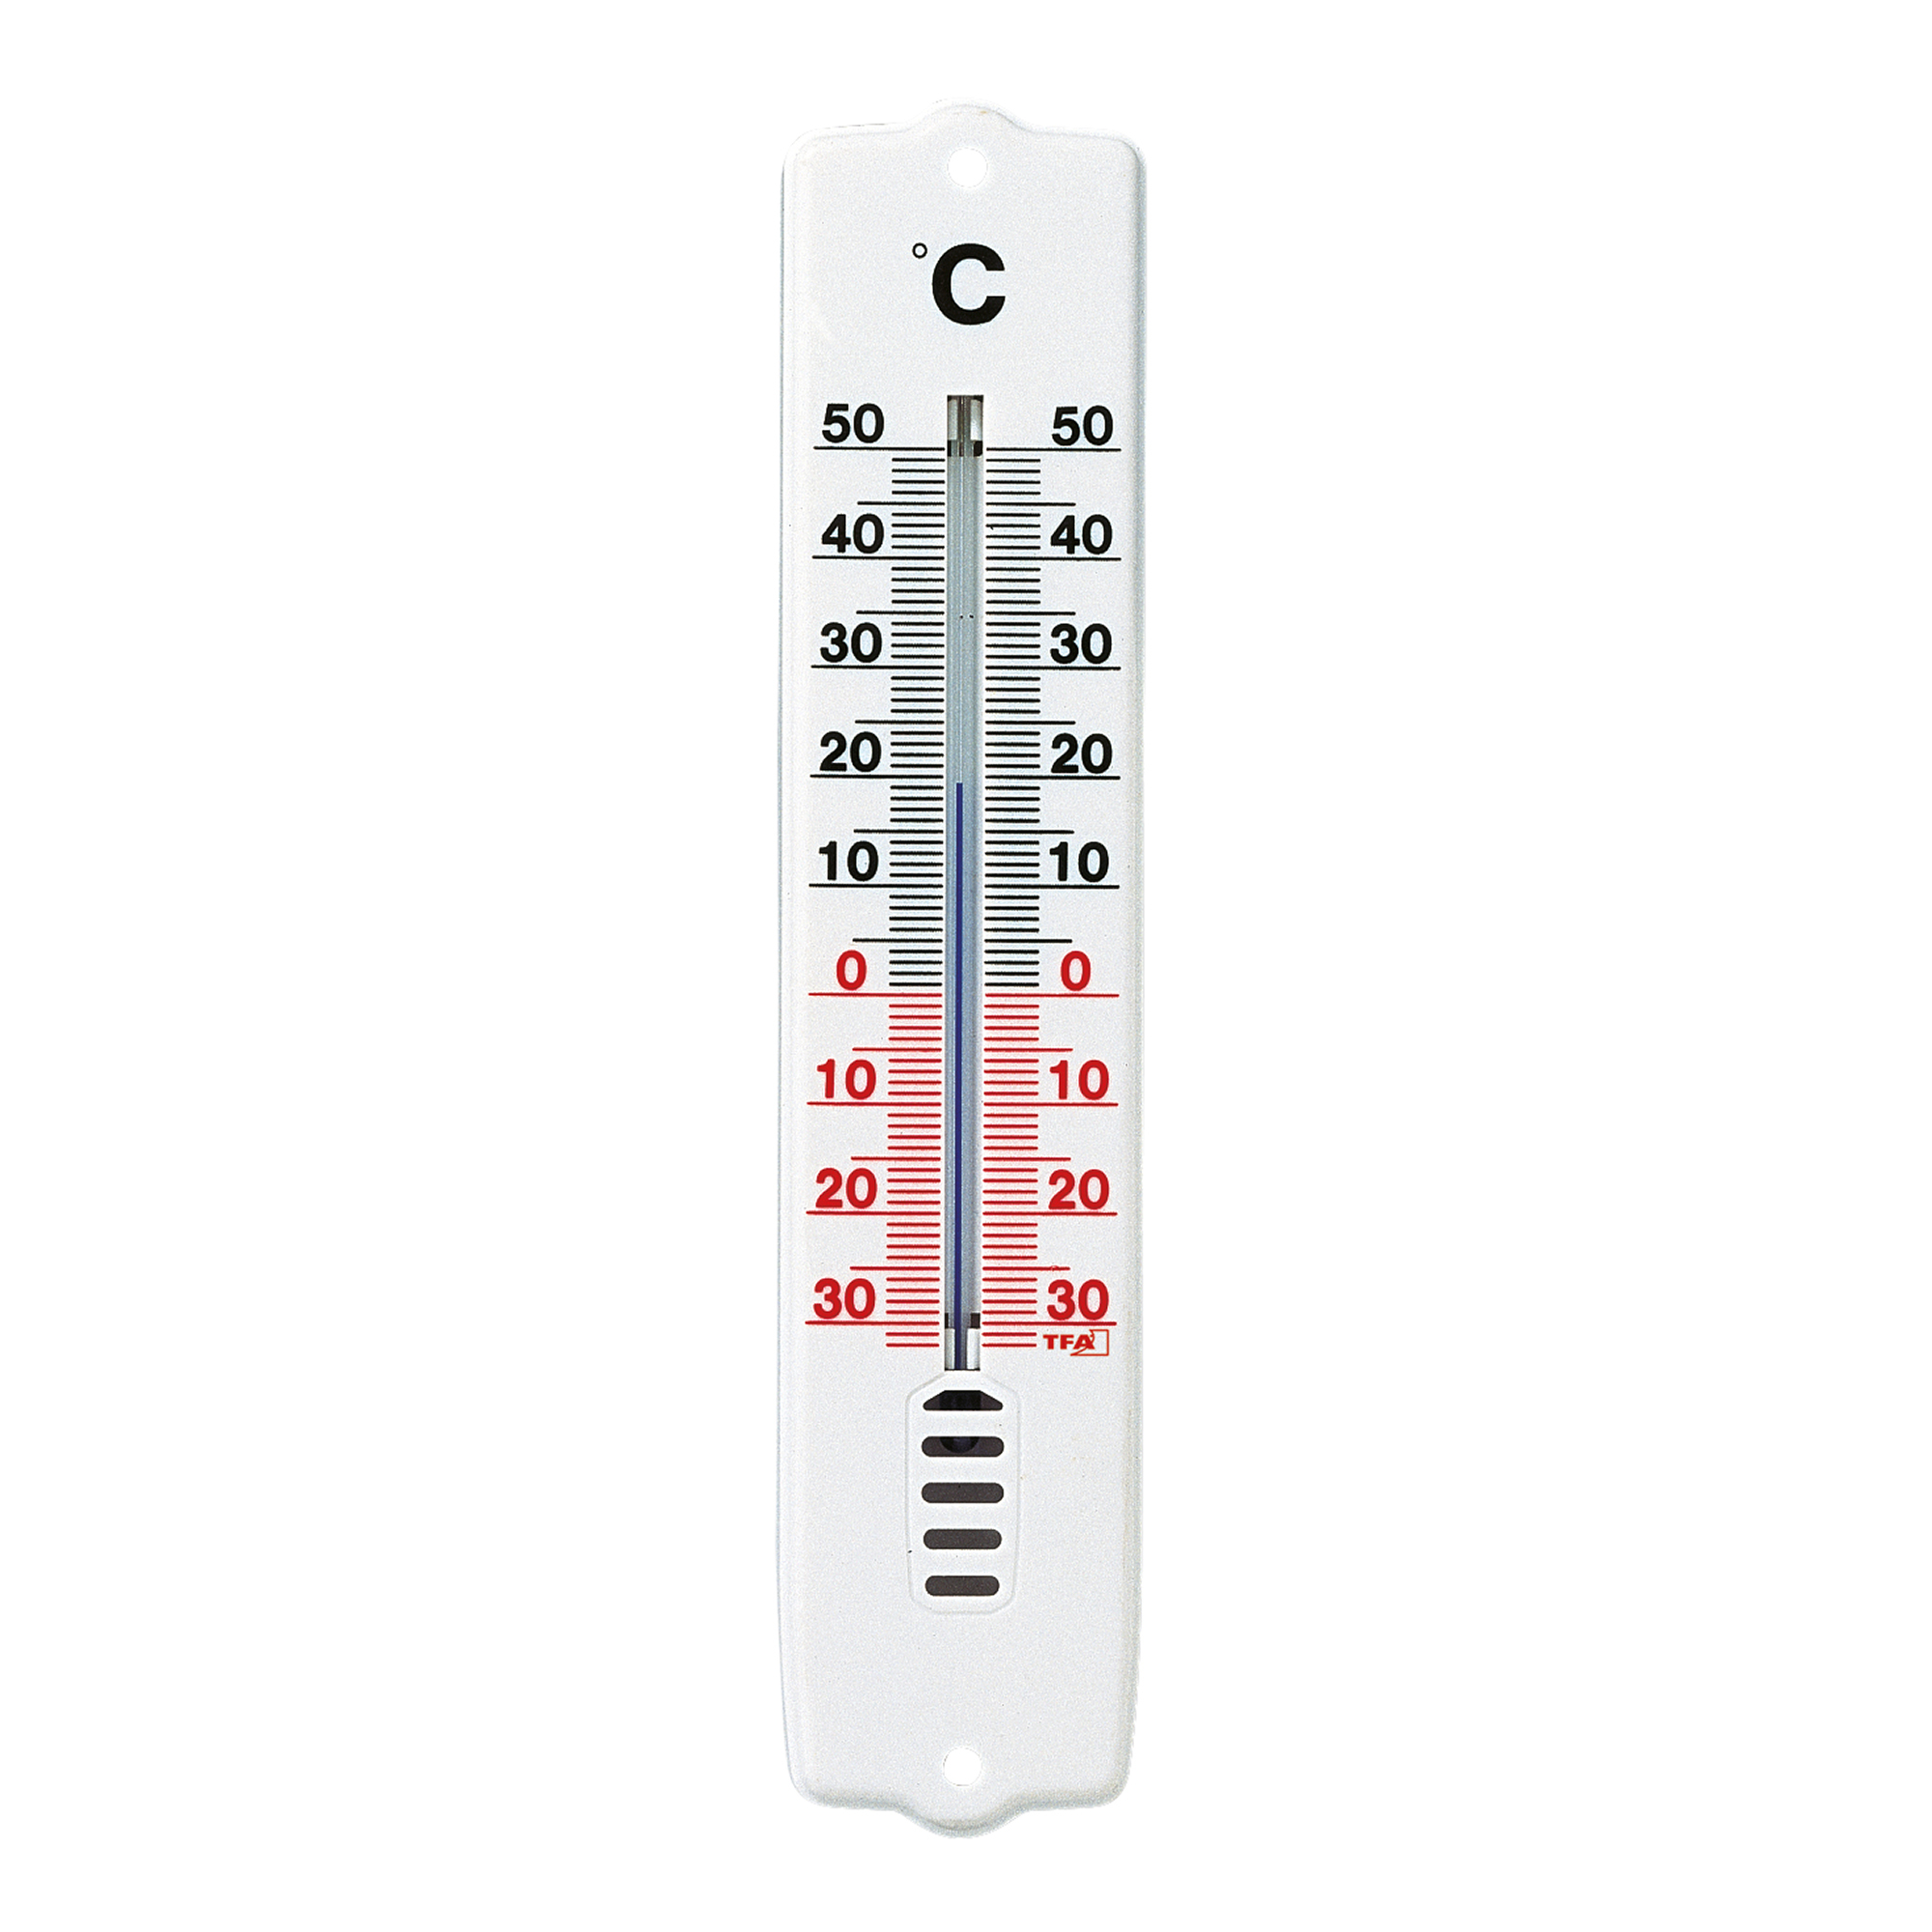 Analogue indoor-outdoor thermometer